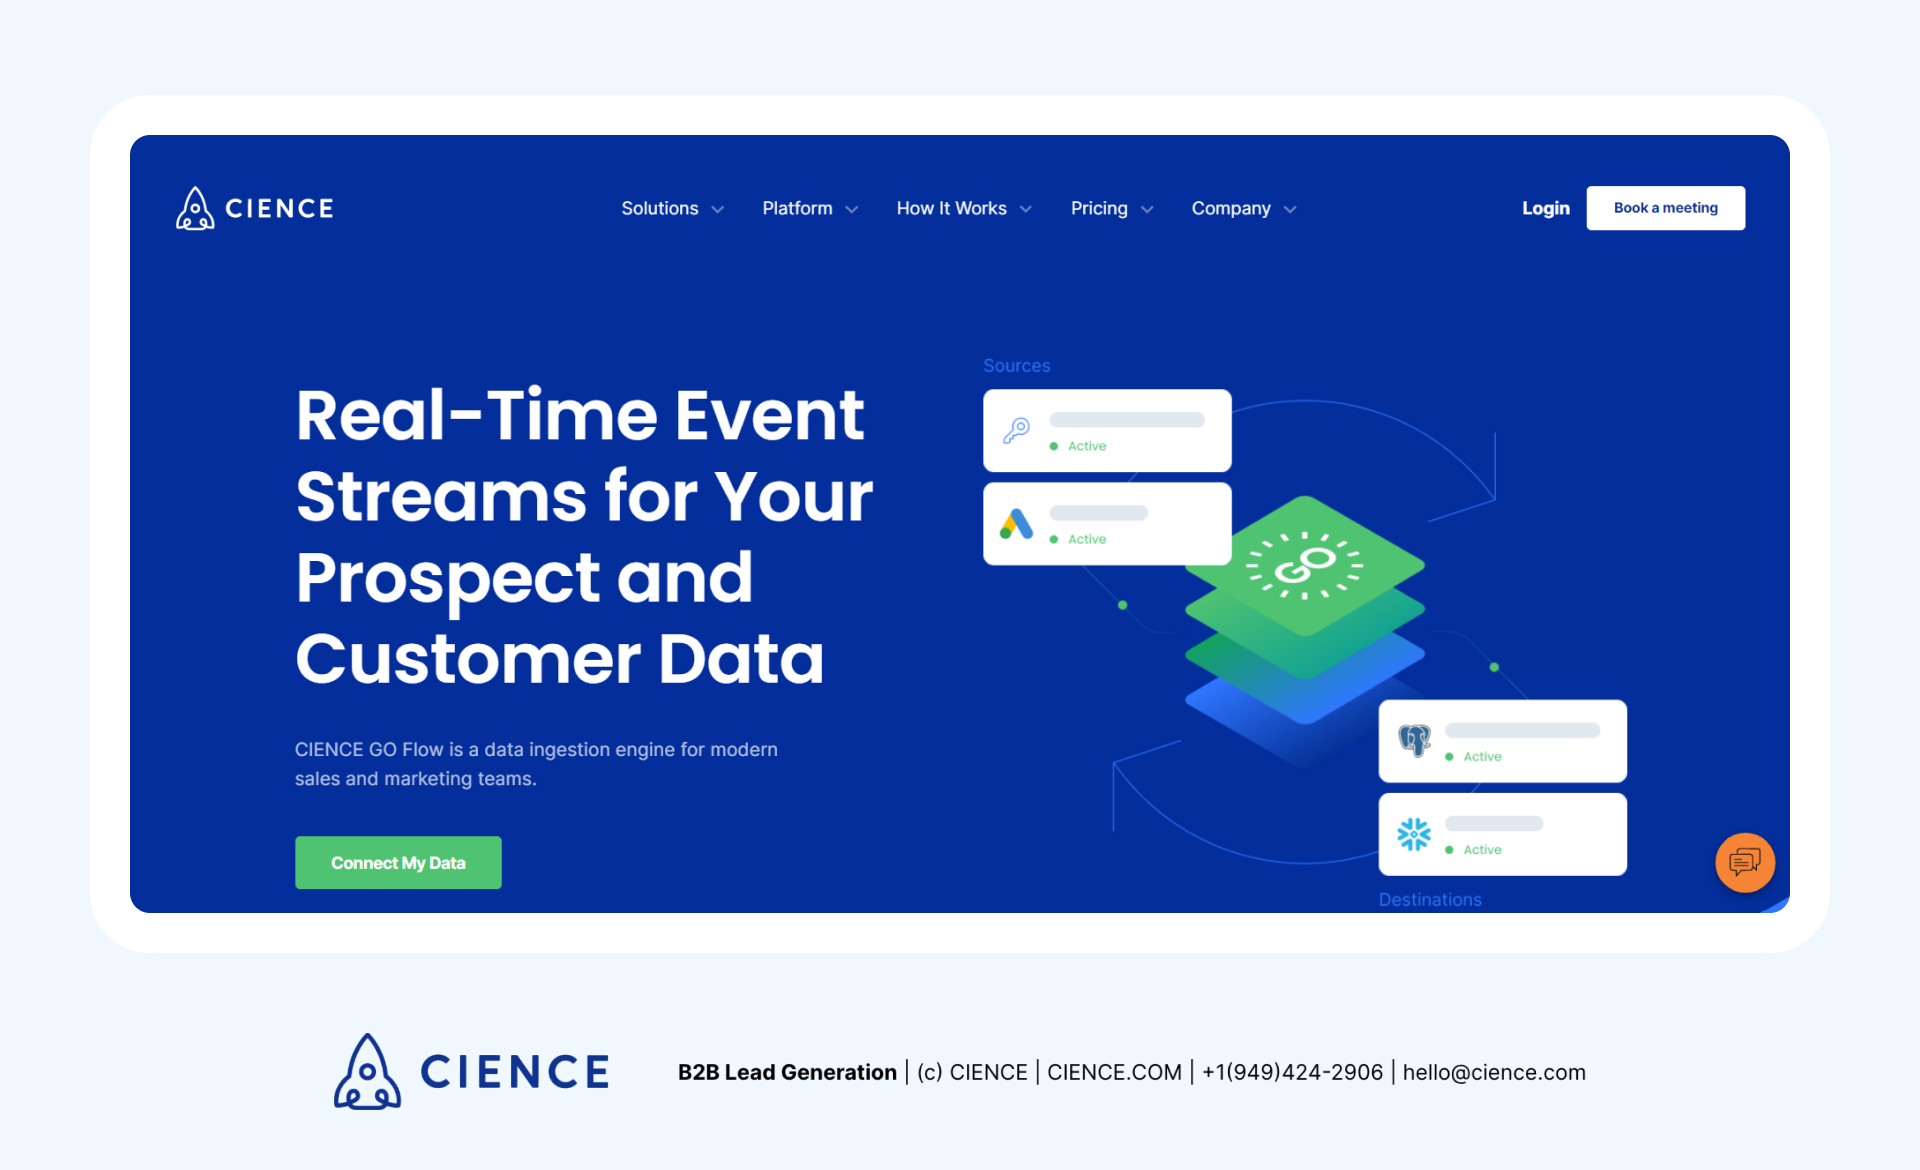 CIENCE GO Flow data orchestration